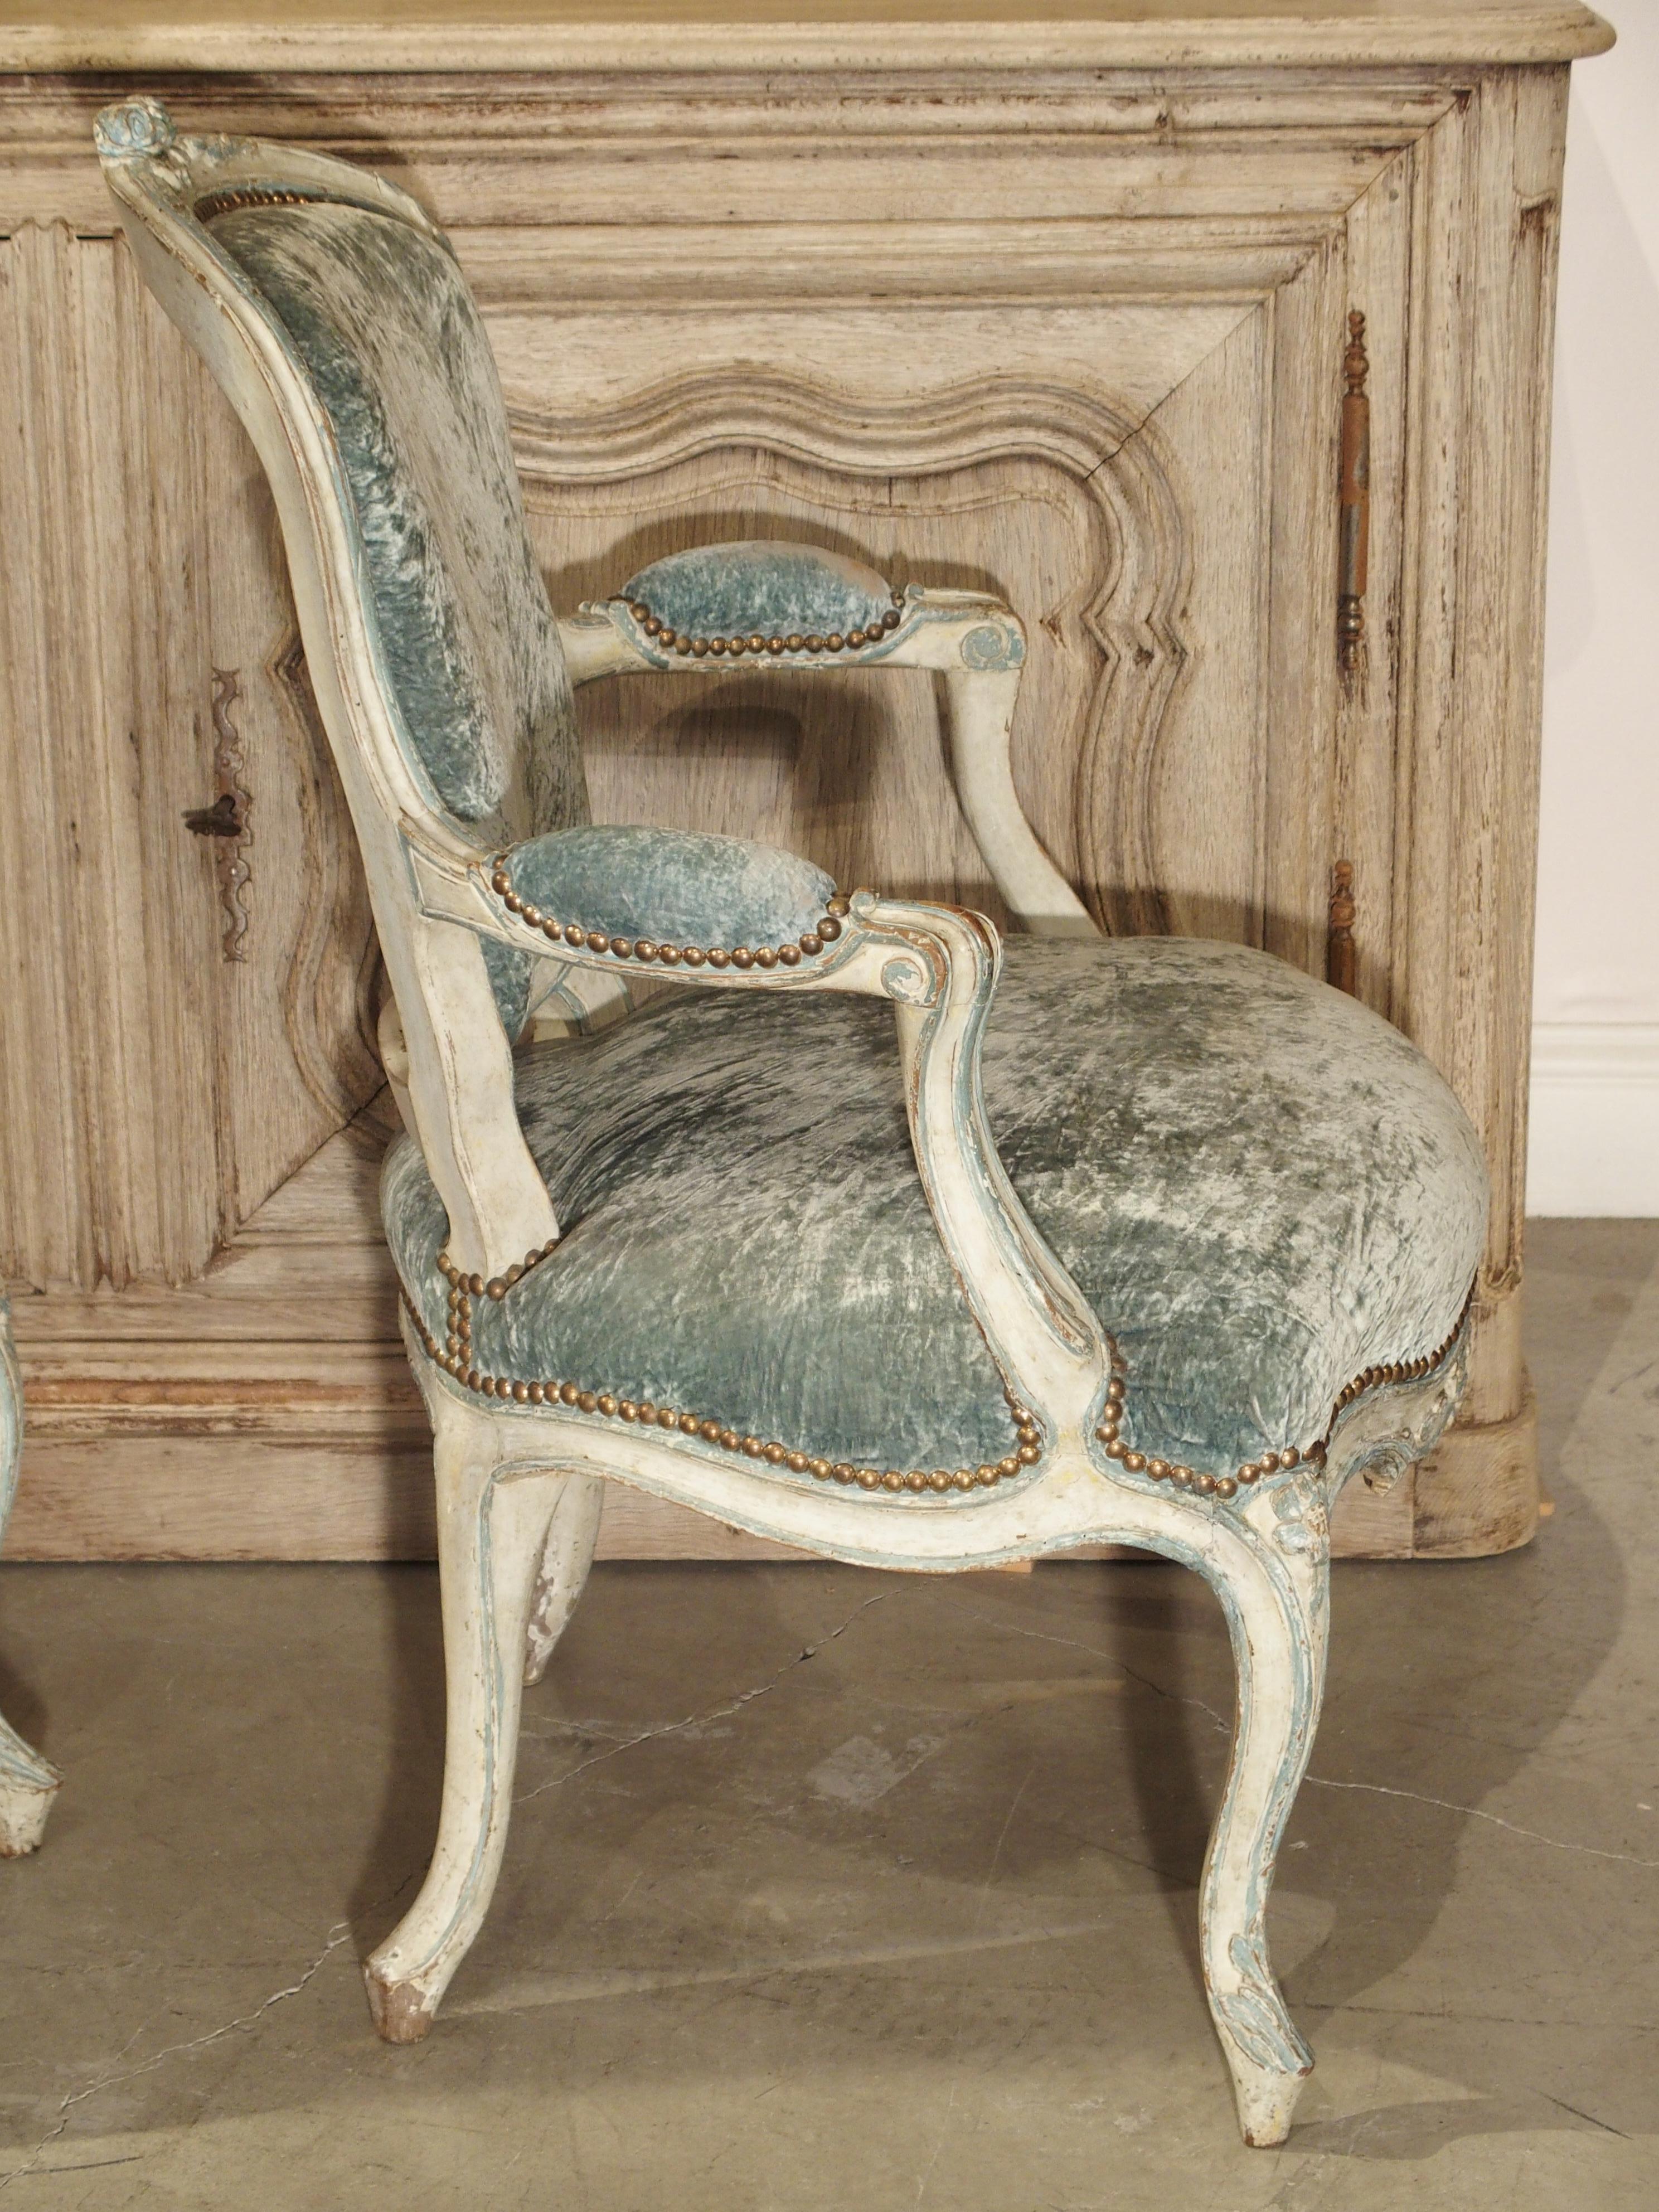 Measures: Back height 35, arm height 24 1/4, seat height 17 5/8, seat width 21 5/8, seat depth 18, total depth 25, width 26.

This is a wonderful pair of rare French blue and cream colored cabriolet chairs from the mid-1700s. They are completely